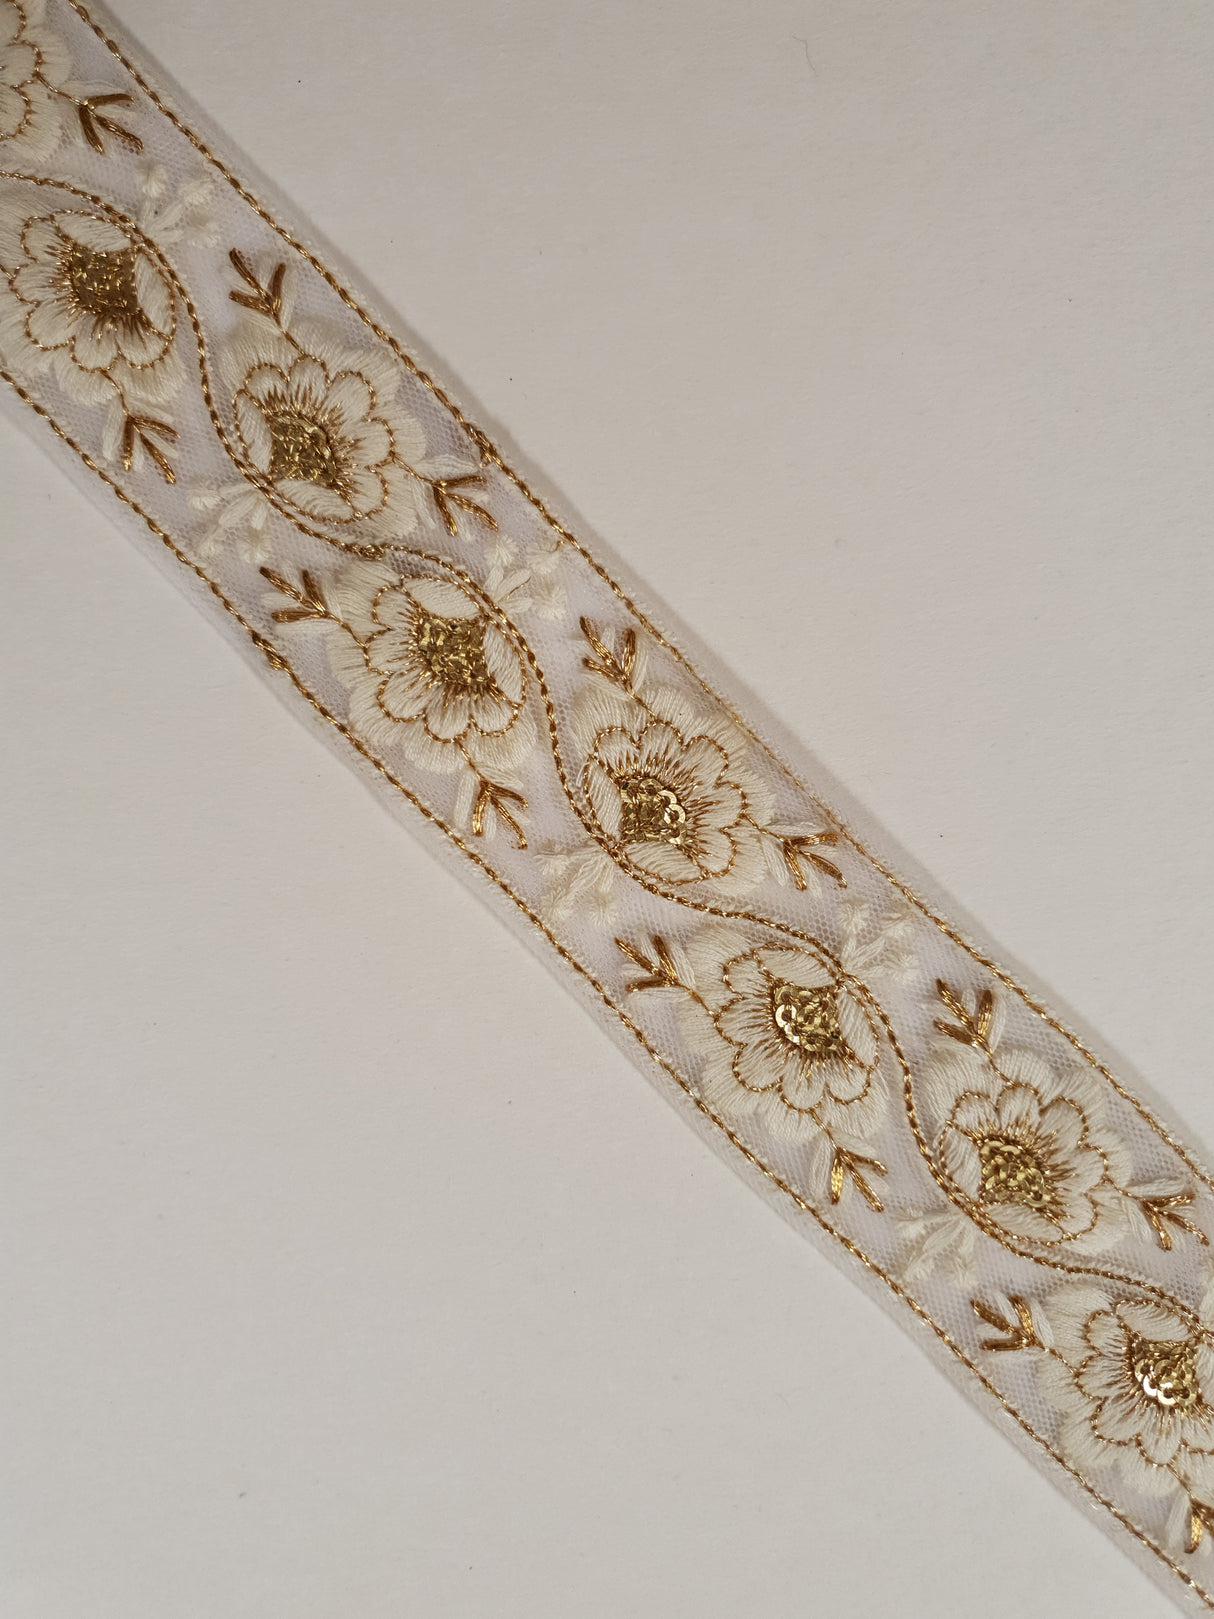 Embroidered Trim - 1 Meter - (ITR-1439)